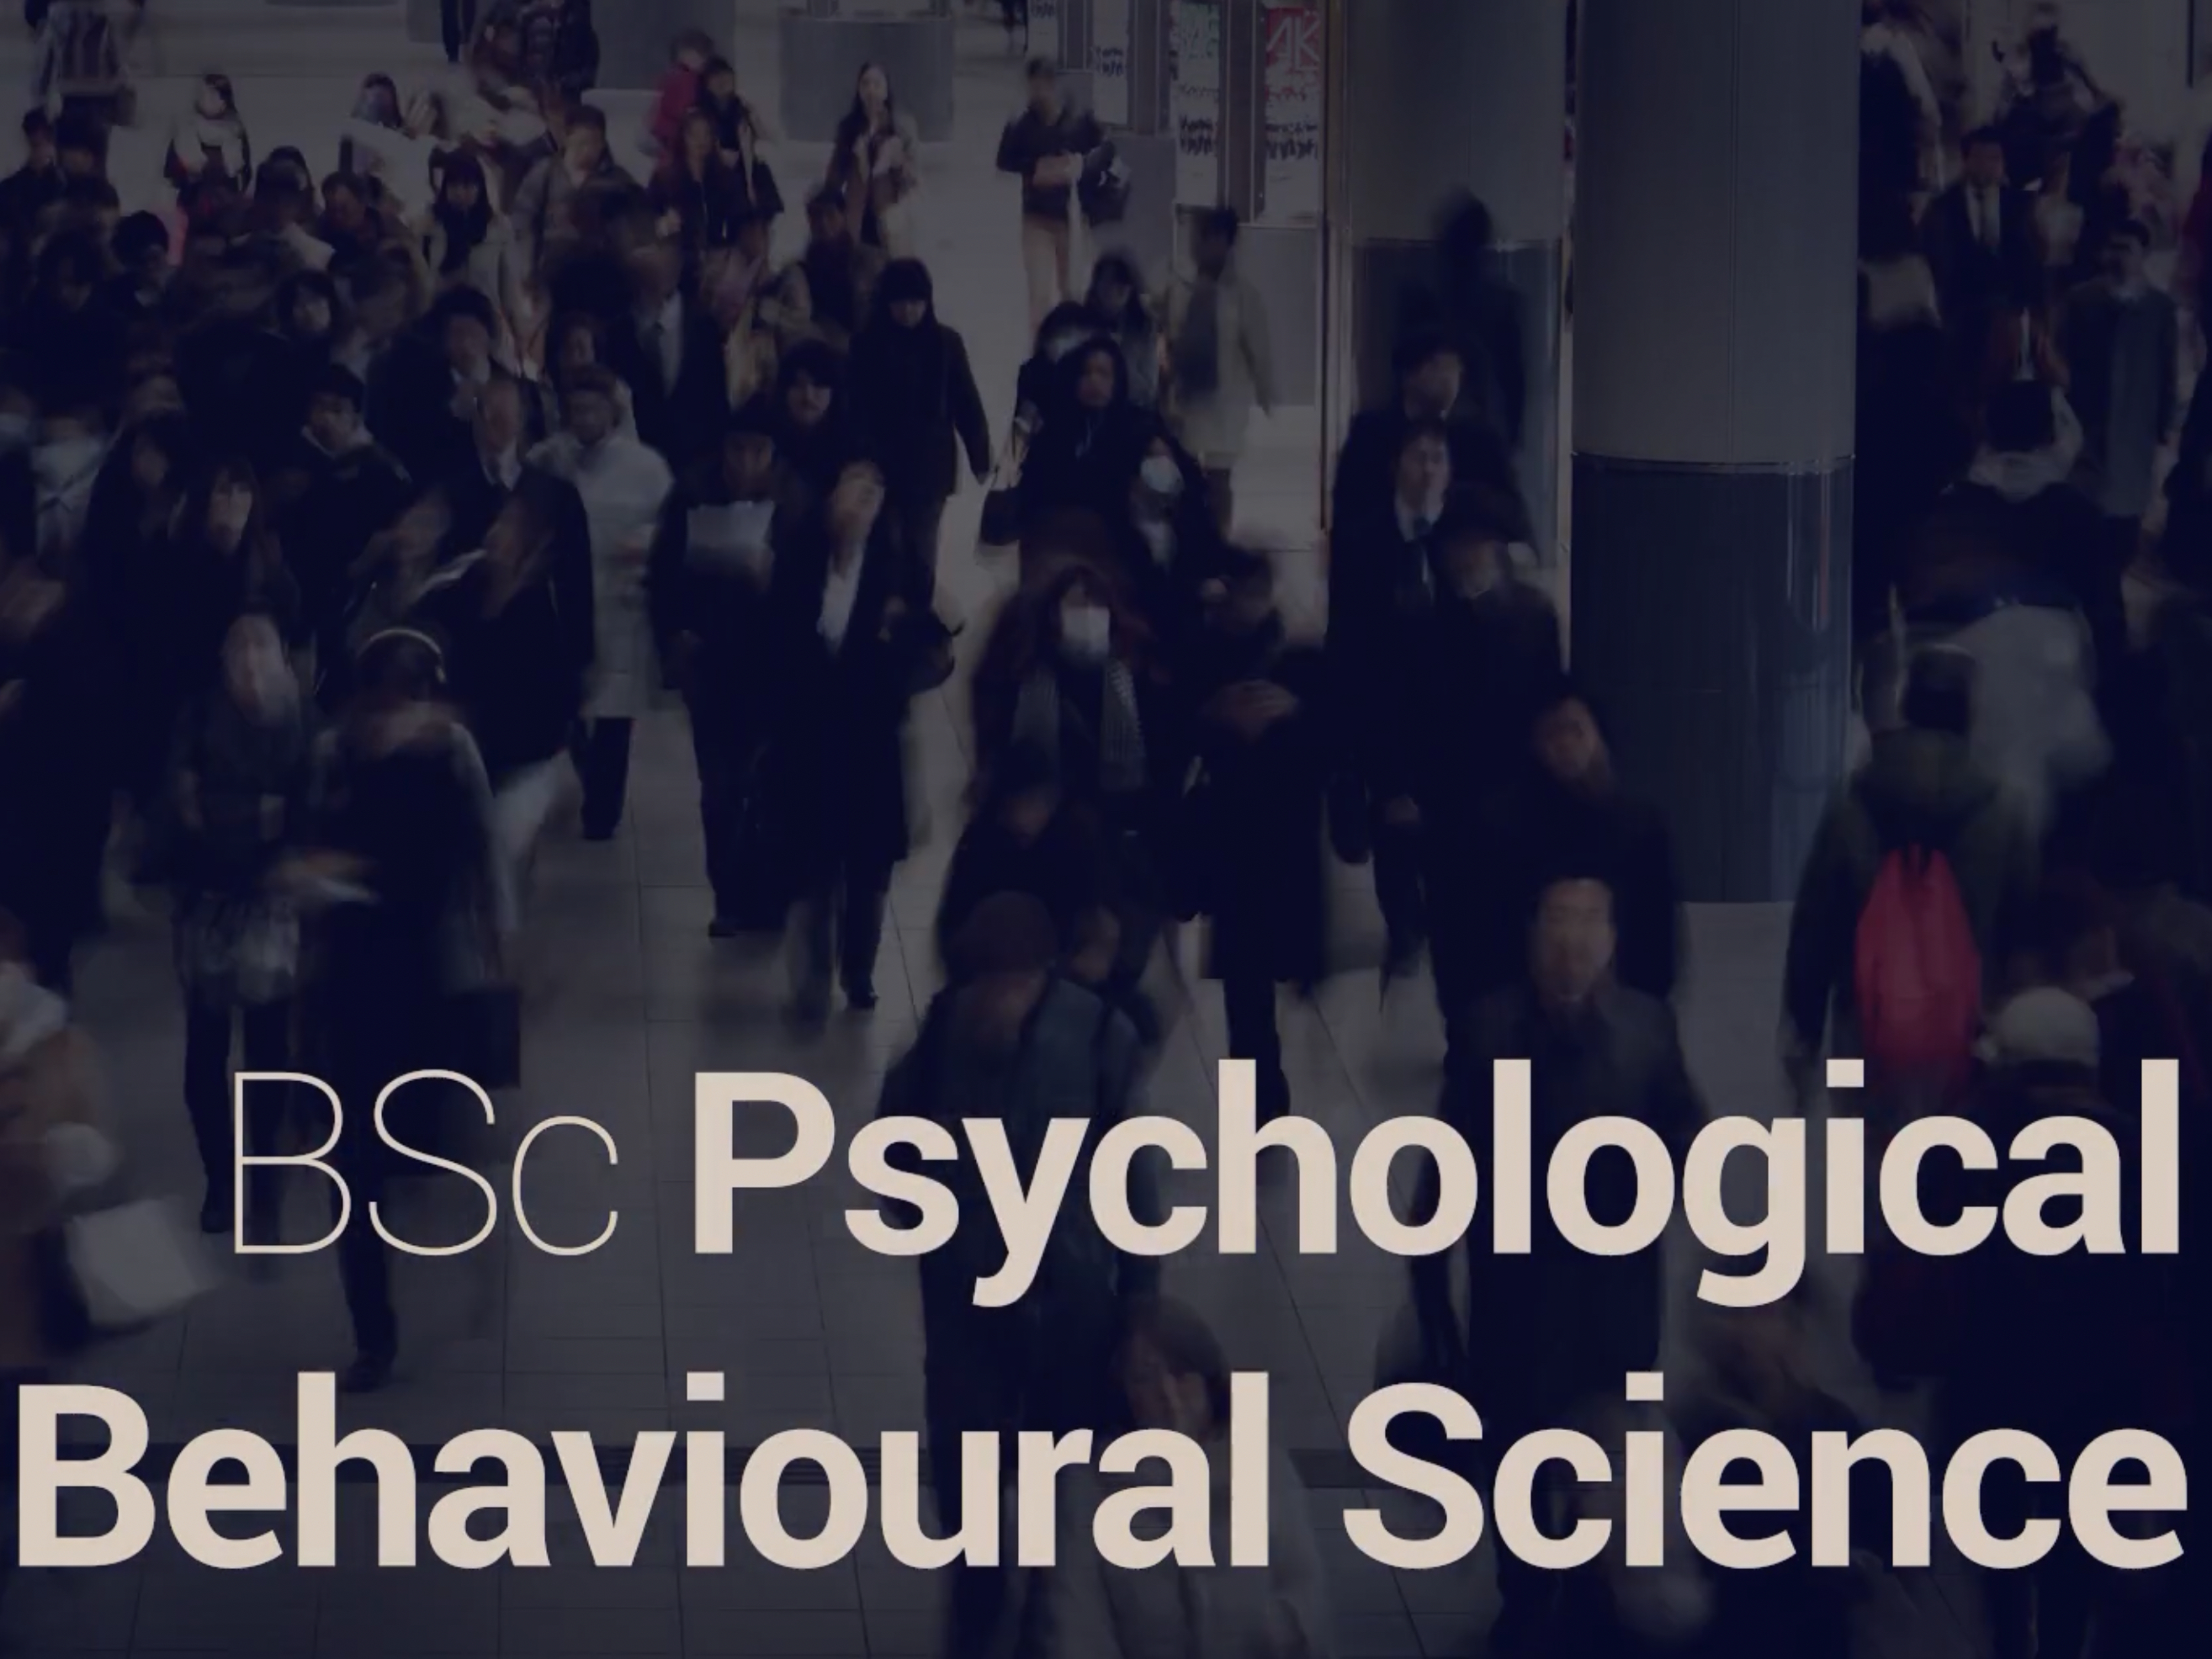 An introduction to BSc Psychological and Behavioural Science